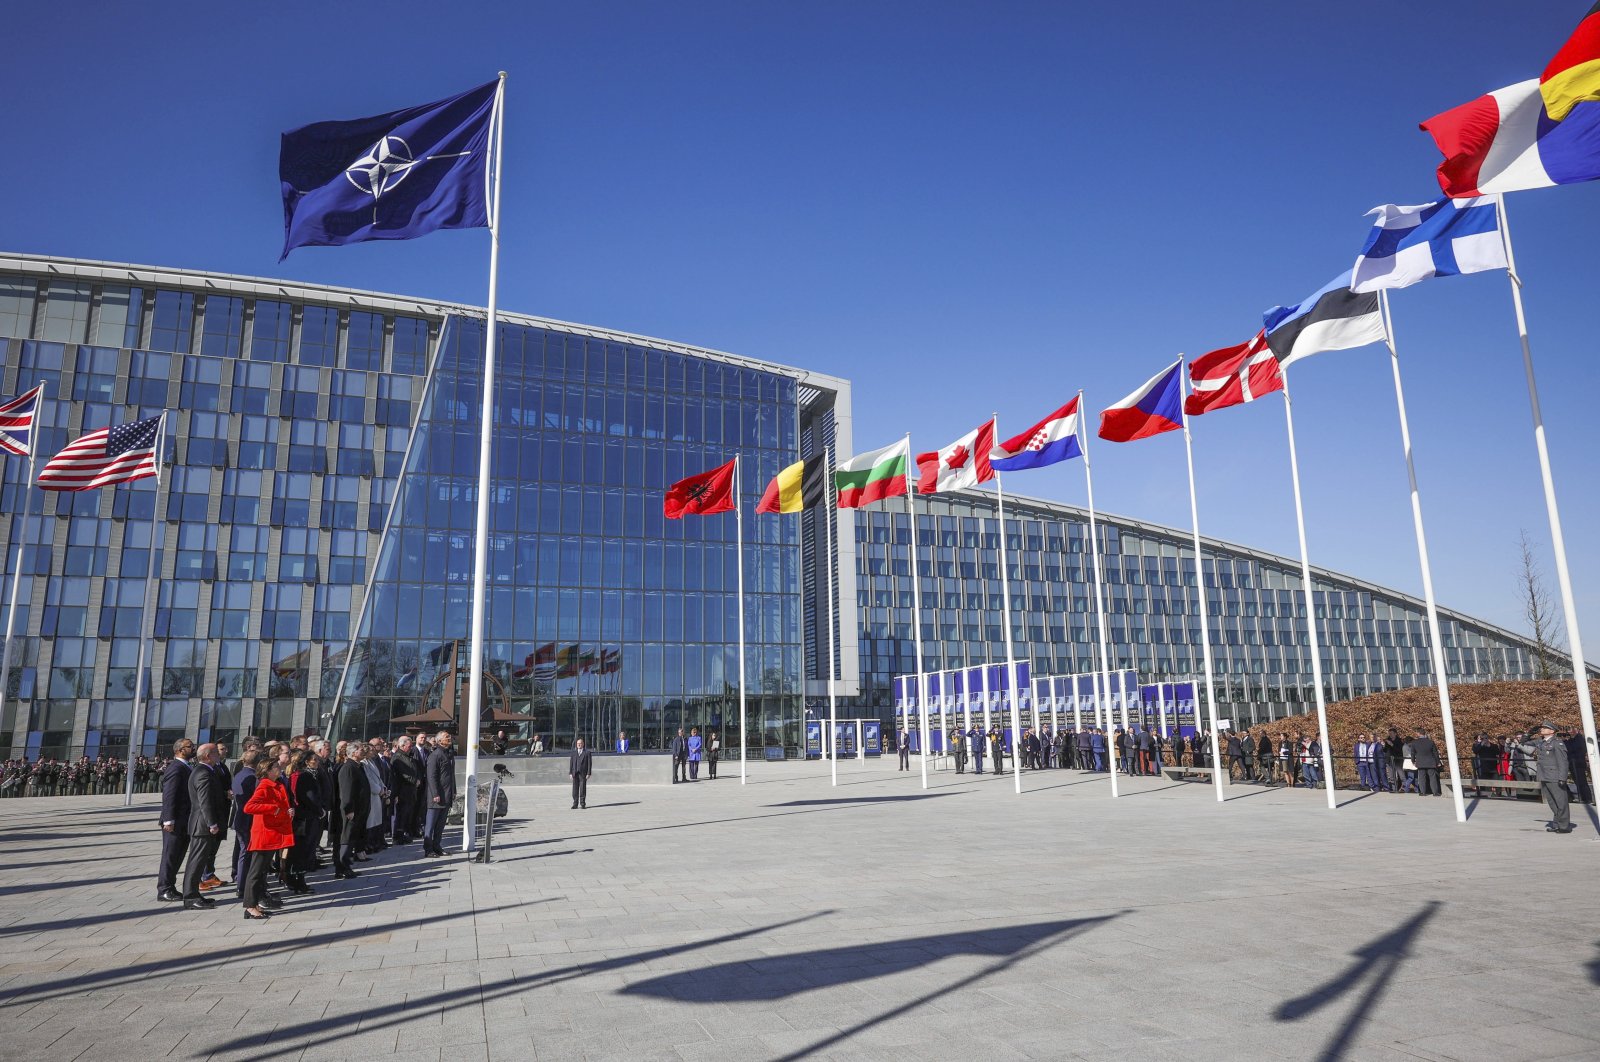 NATO foreign ministers pose during a ceremony to raise the Finnish flag on the sidelines of a NATO foreign ministers meeting at NATO headquarters in Brussels, Belgium, April 4, 2023. (AP Photo)